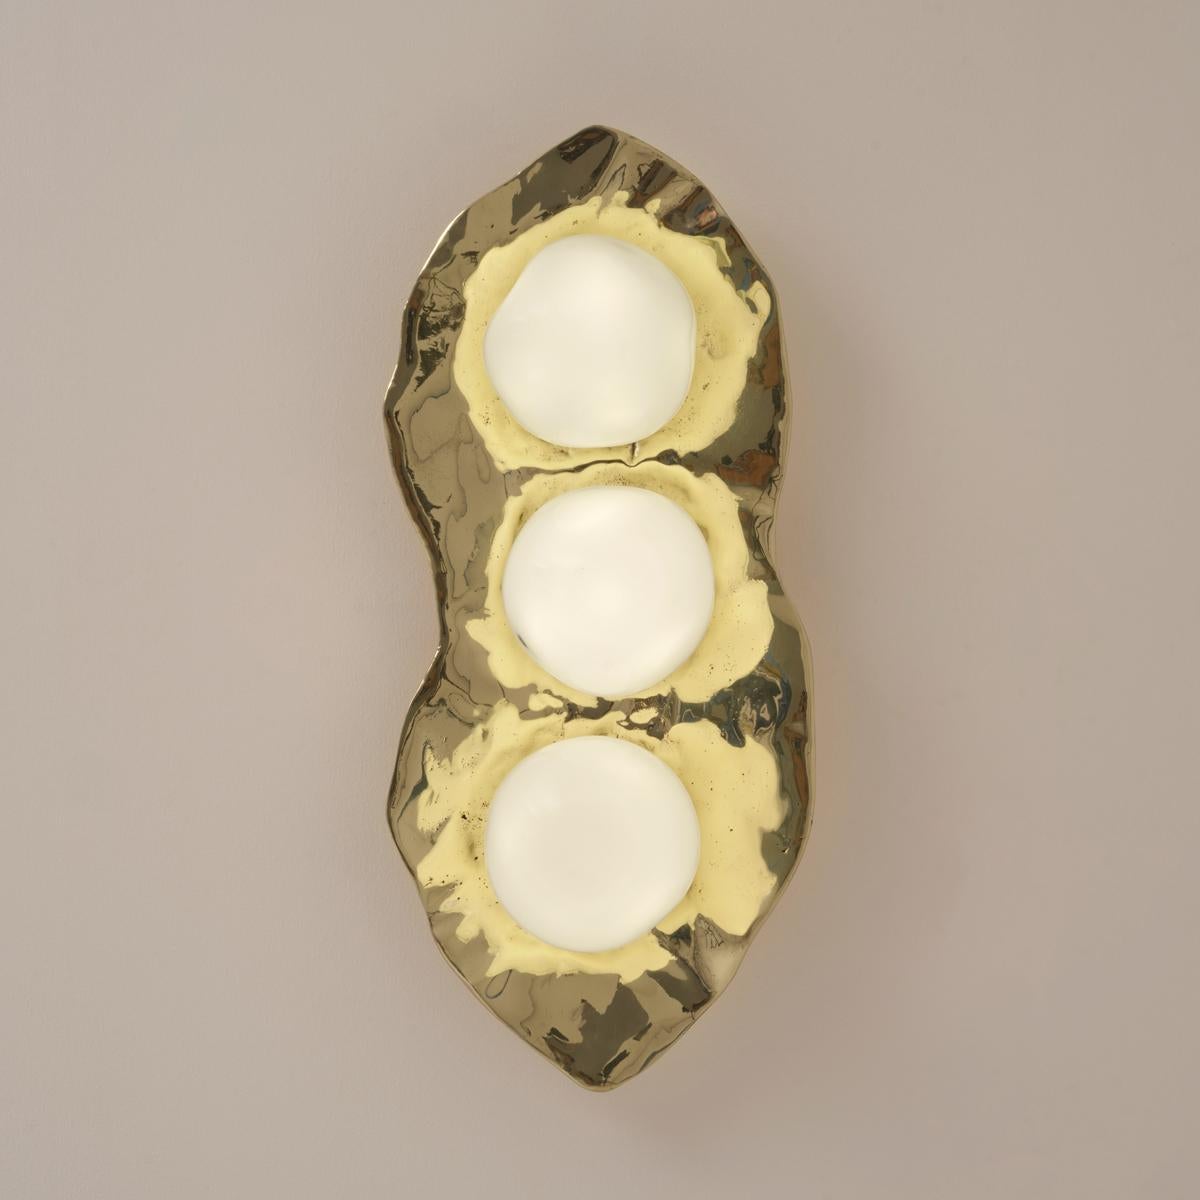 Shell Ceiling Light by Gaspare Asaro-Polished Brass Finish In New Condition For Sale In New York, NY